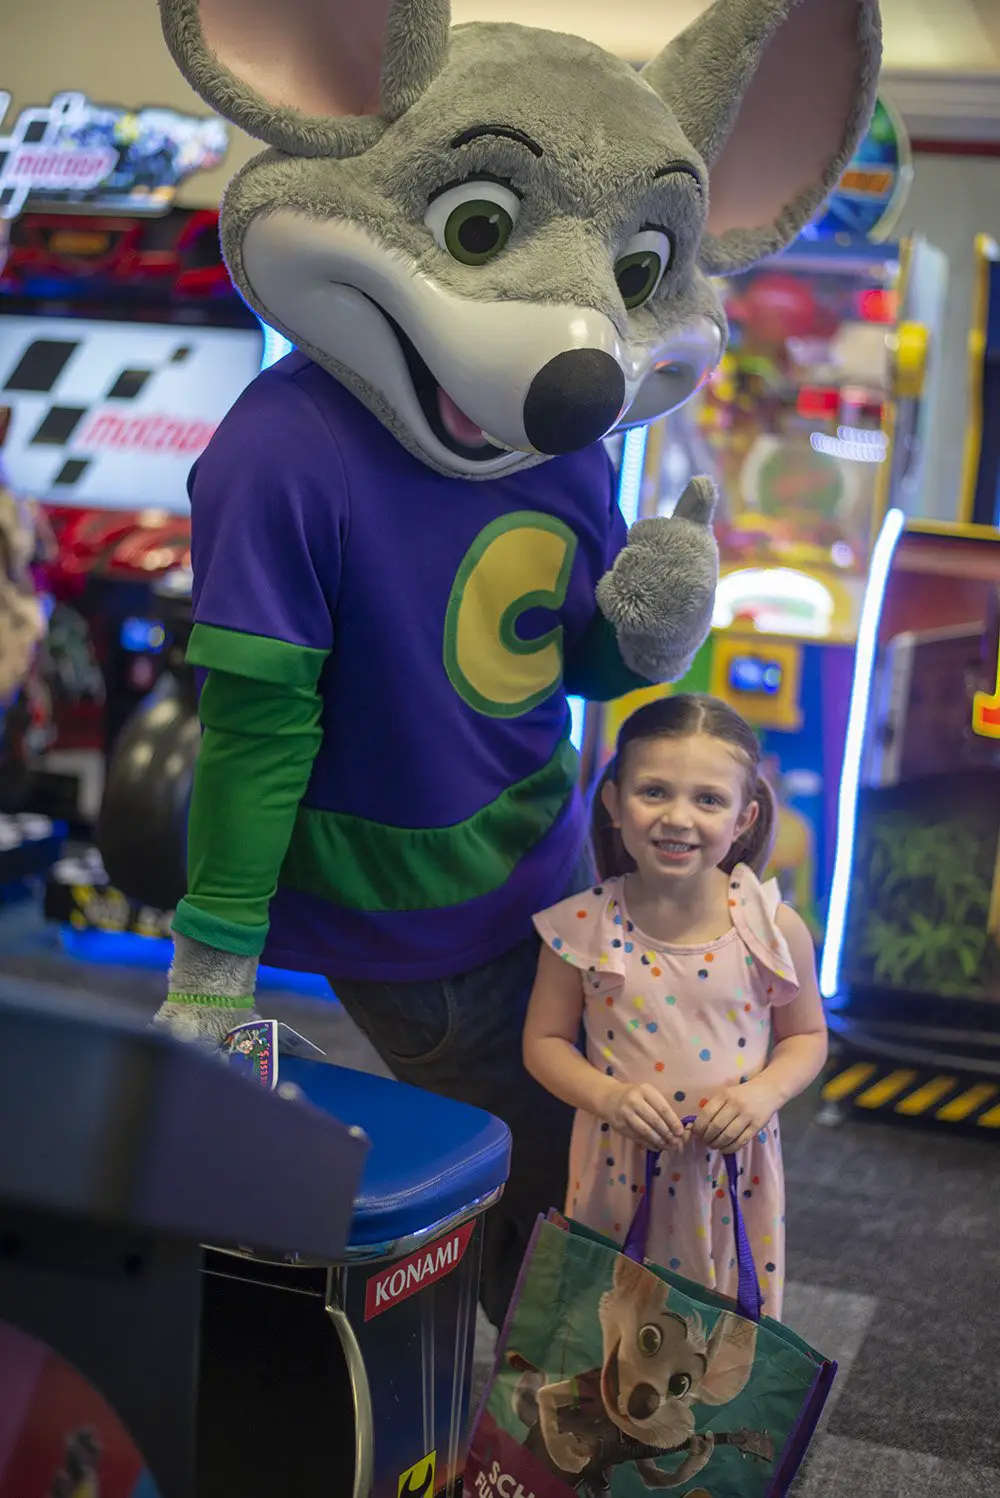 Fun for the whole family at Chuck E. Cheese